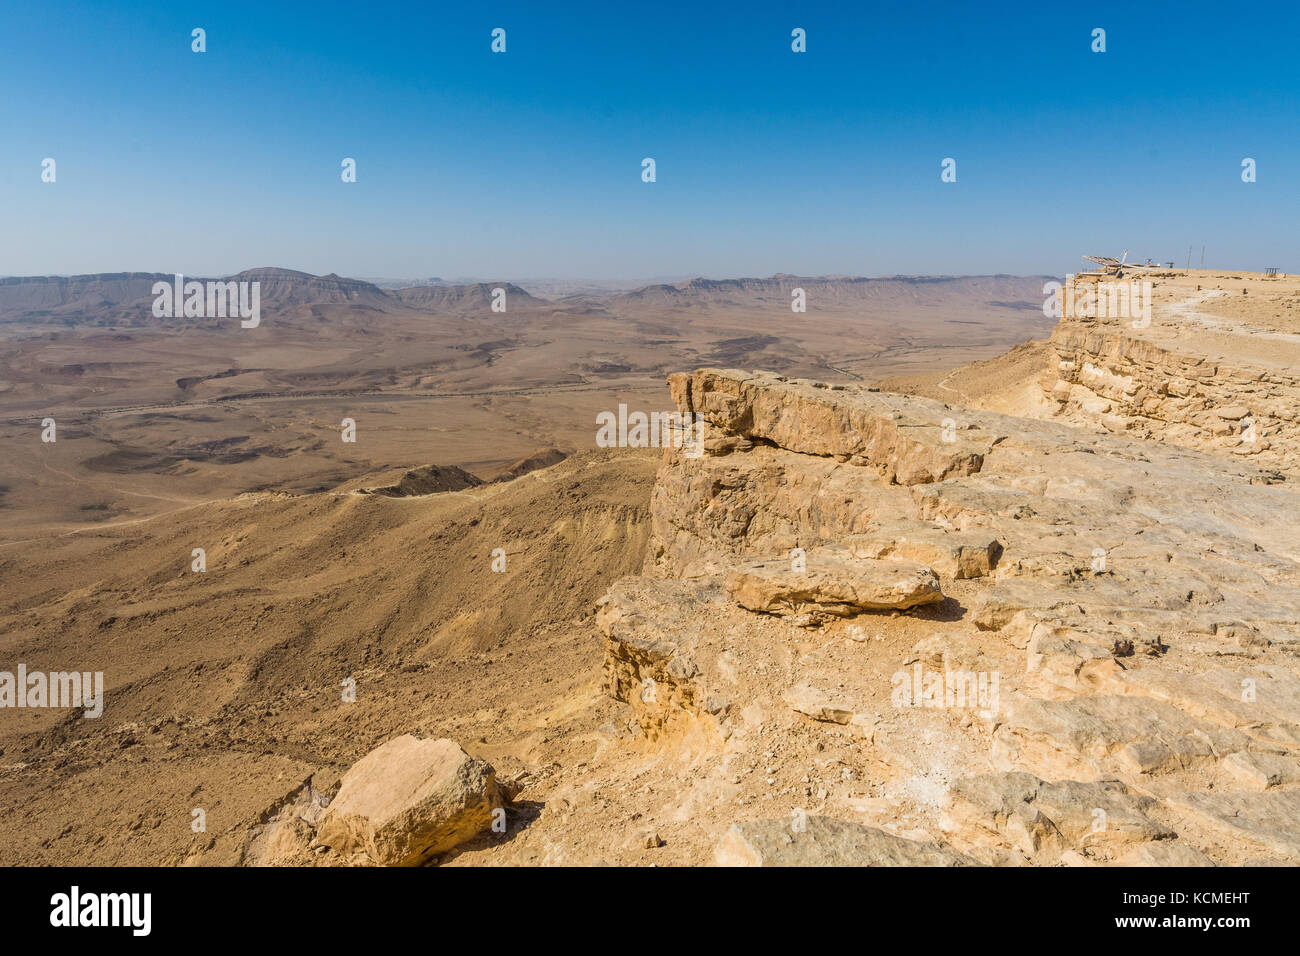 sand and rocks of the Negev desert, Israel Stock Photo